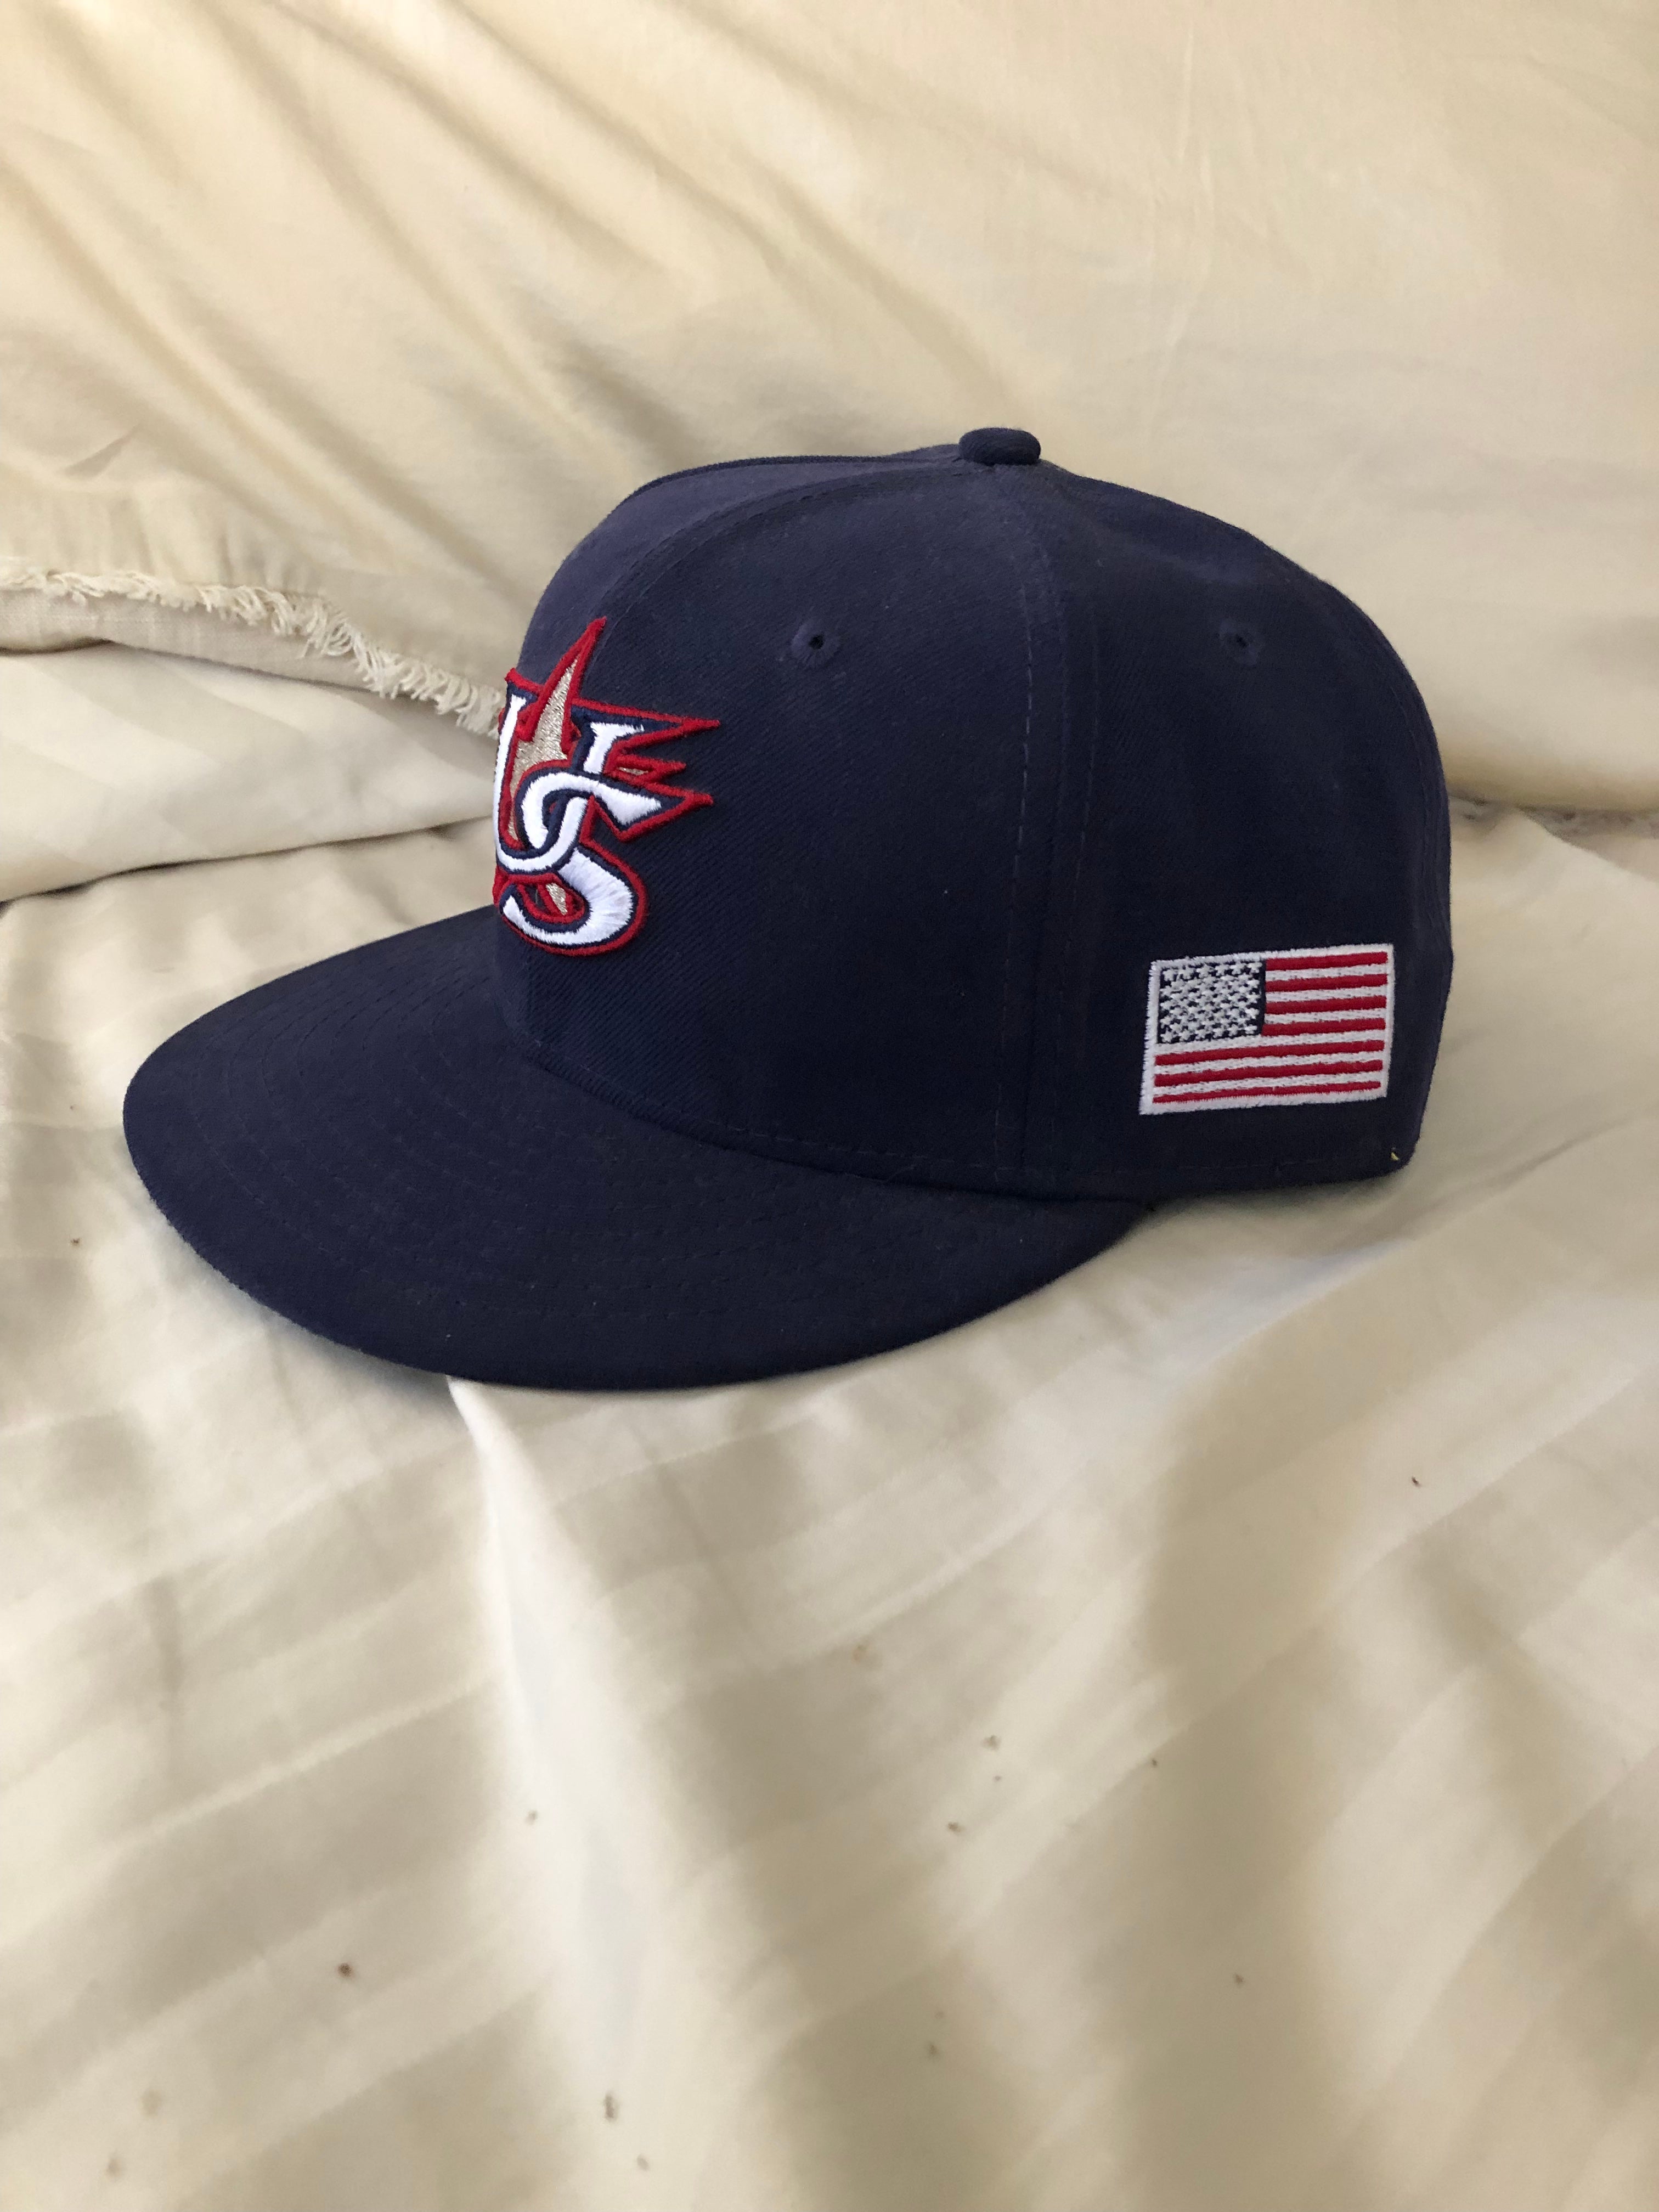 United States of America WBC 7 1/8 New Era Fitted Hat